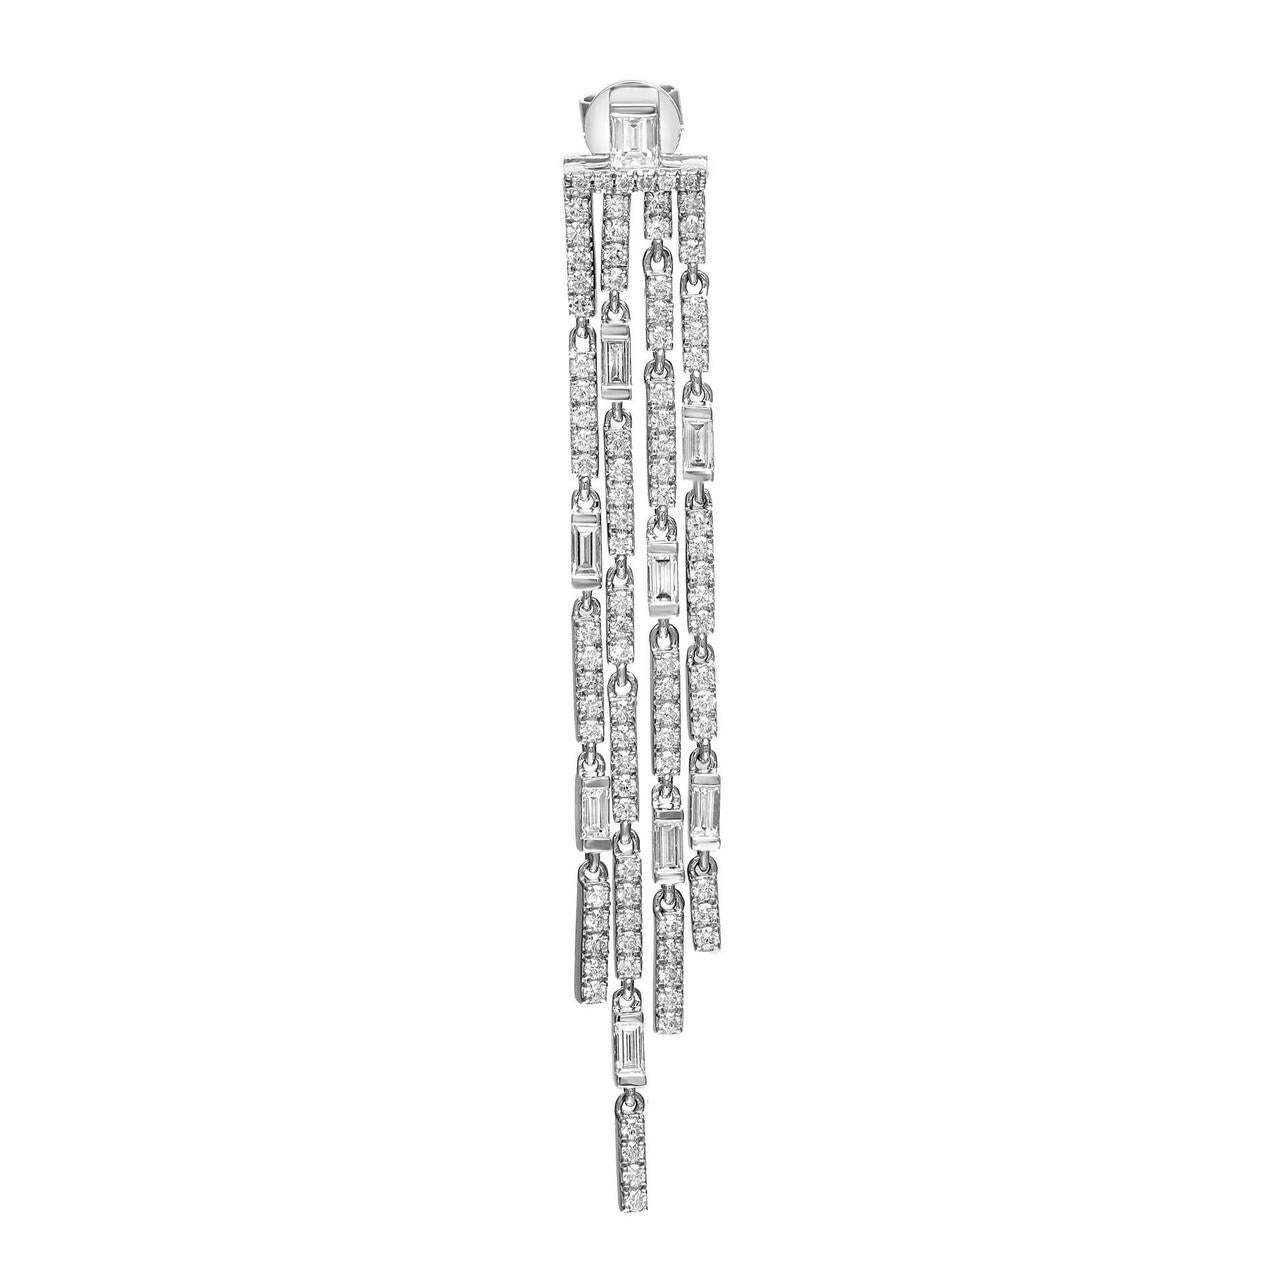 The 4-Drop Diamond Chandelier Earrings are adorned with a mesmerizing combination of Baguette and Round Cut diamonds. The Baguette Cut diamonds add a sleek and elongated shape to the design, creating a modern and sophisticated look. These